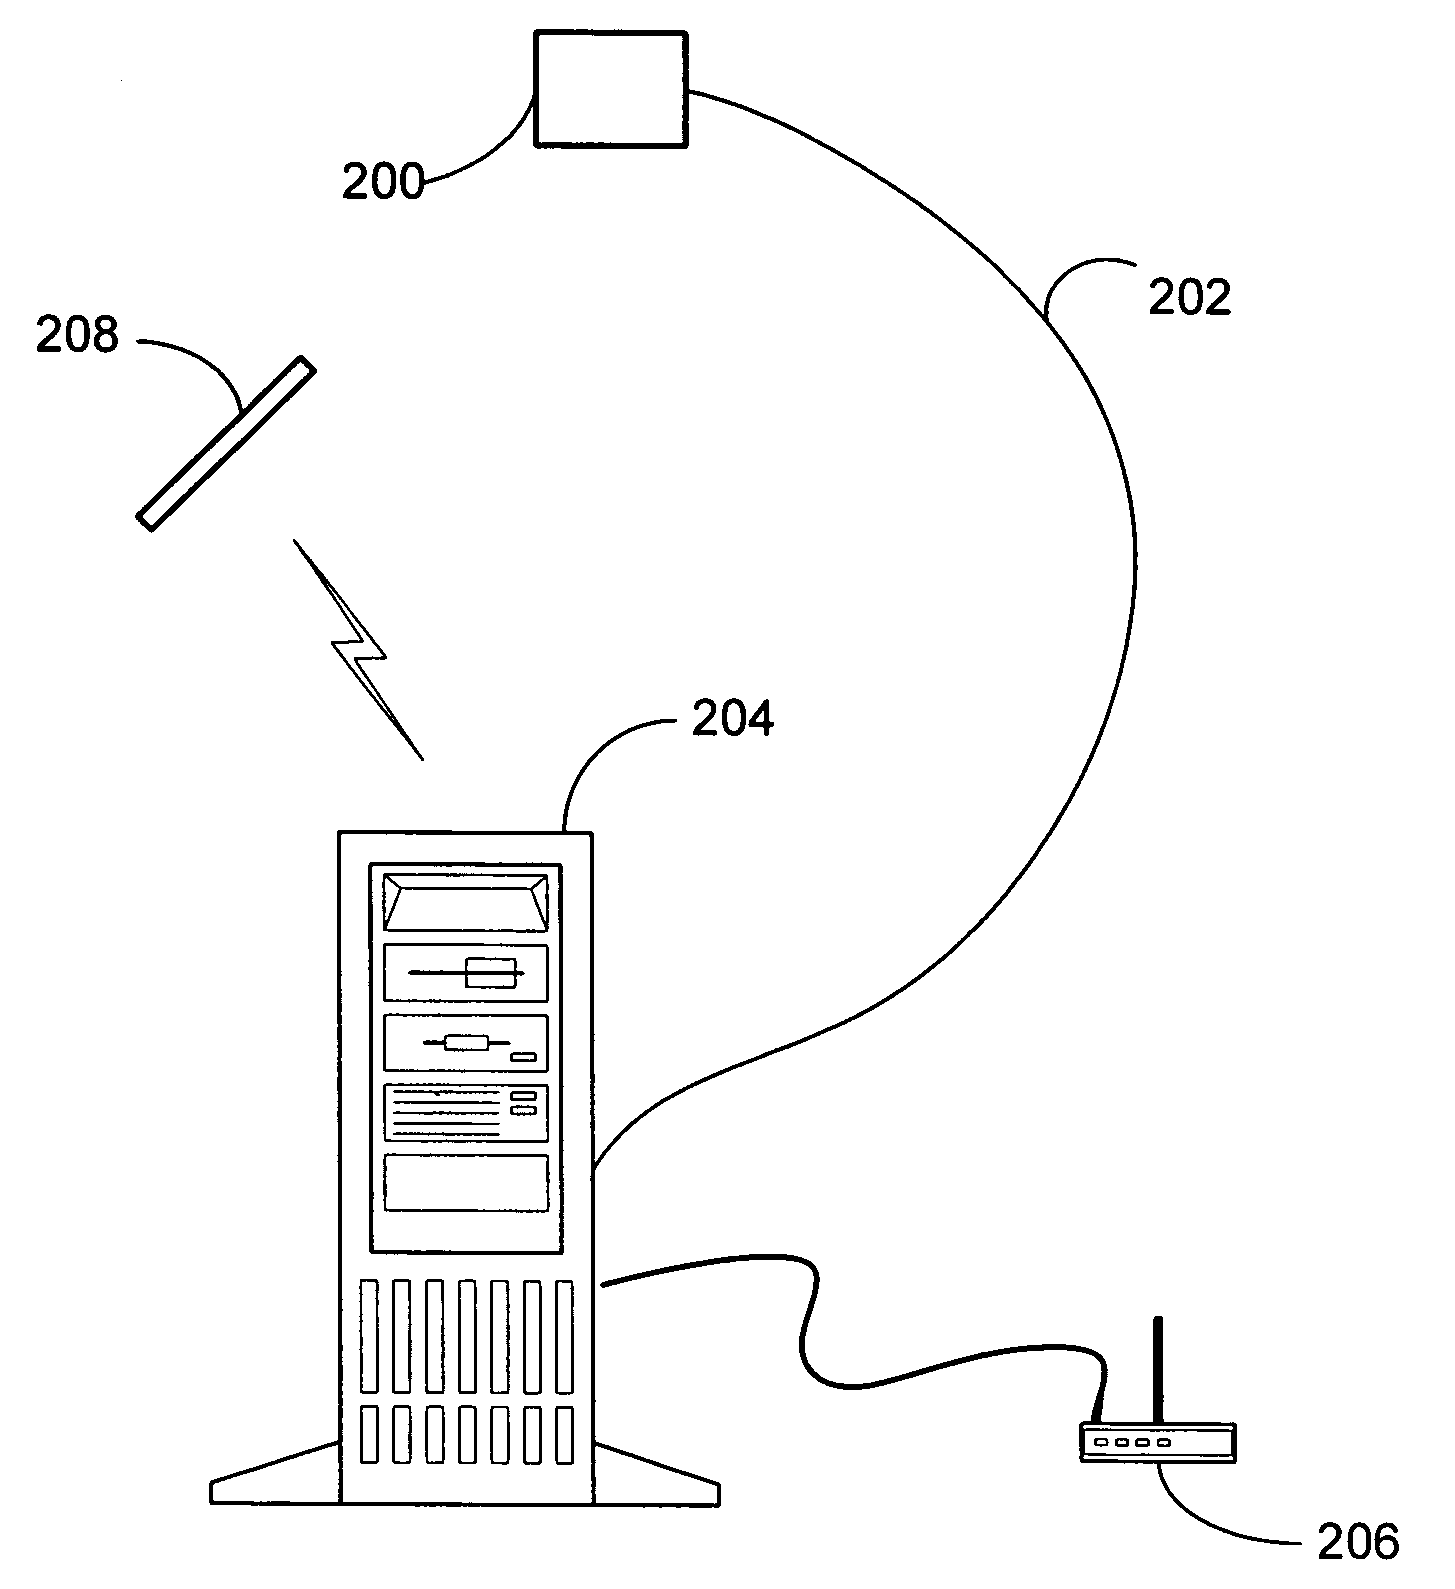 Pointing device and cursor for use in intelligent computing environments